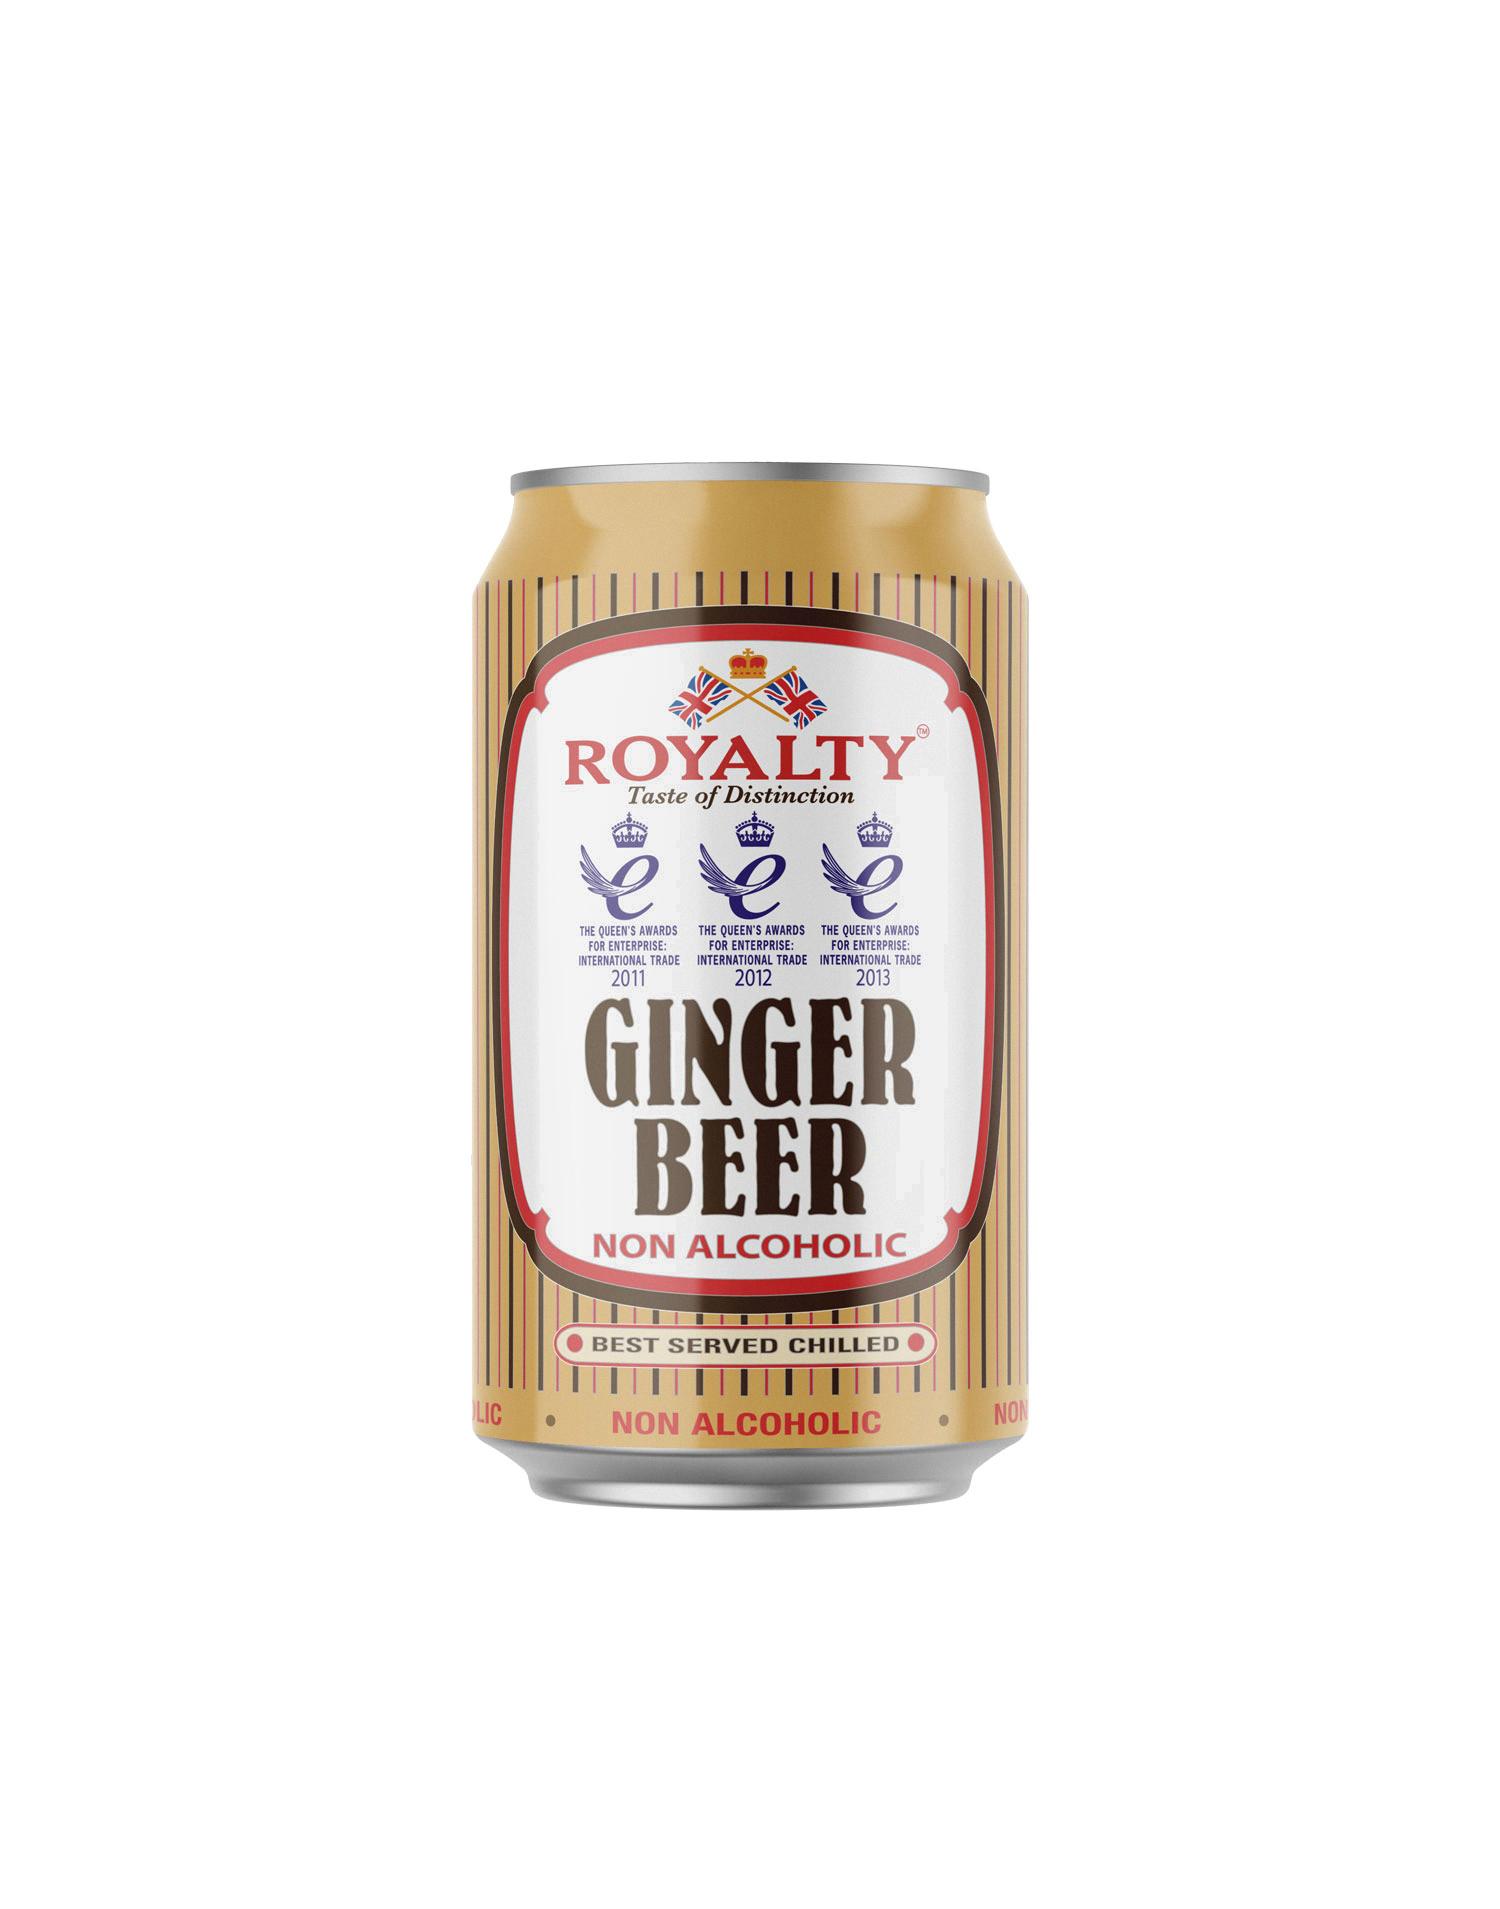 is non alcoholic ginger beer good for upset stomach